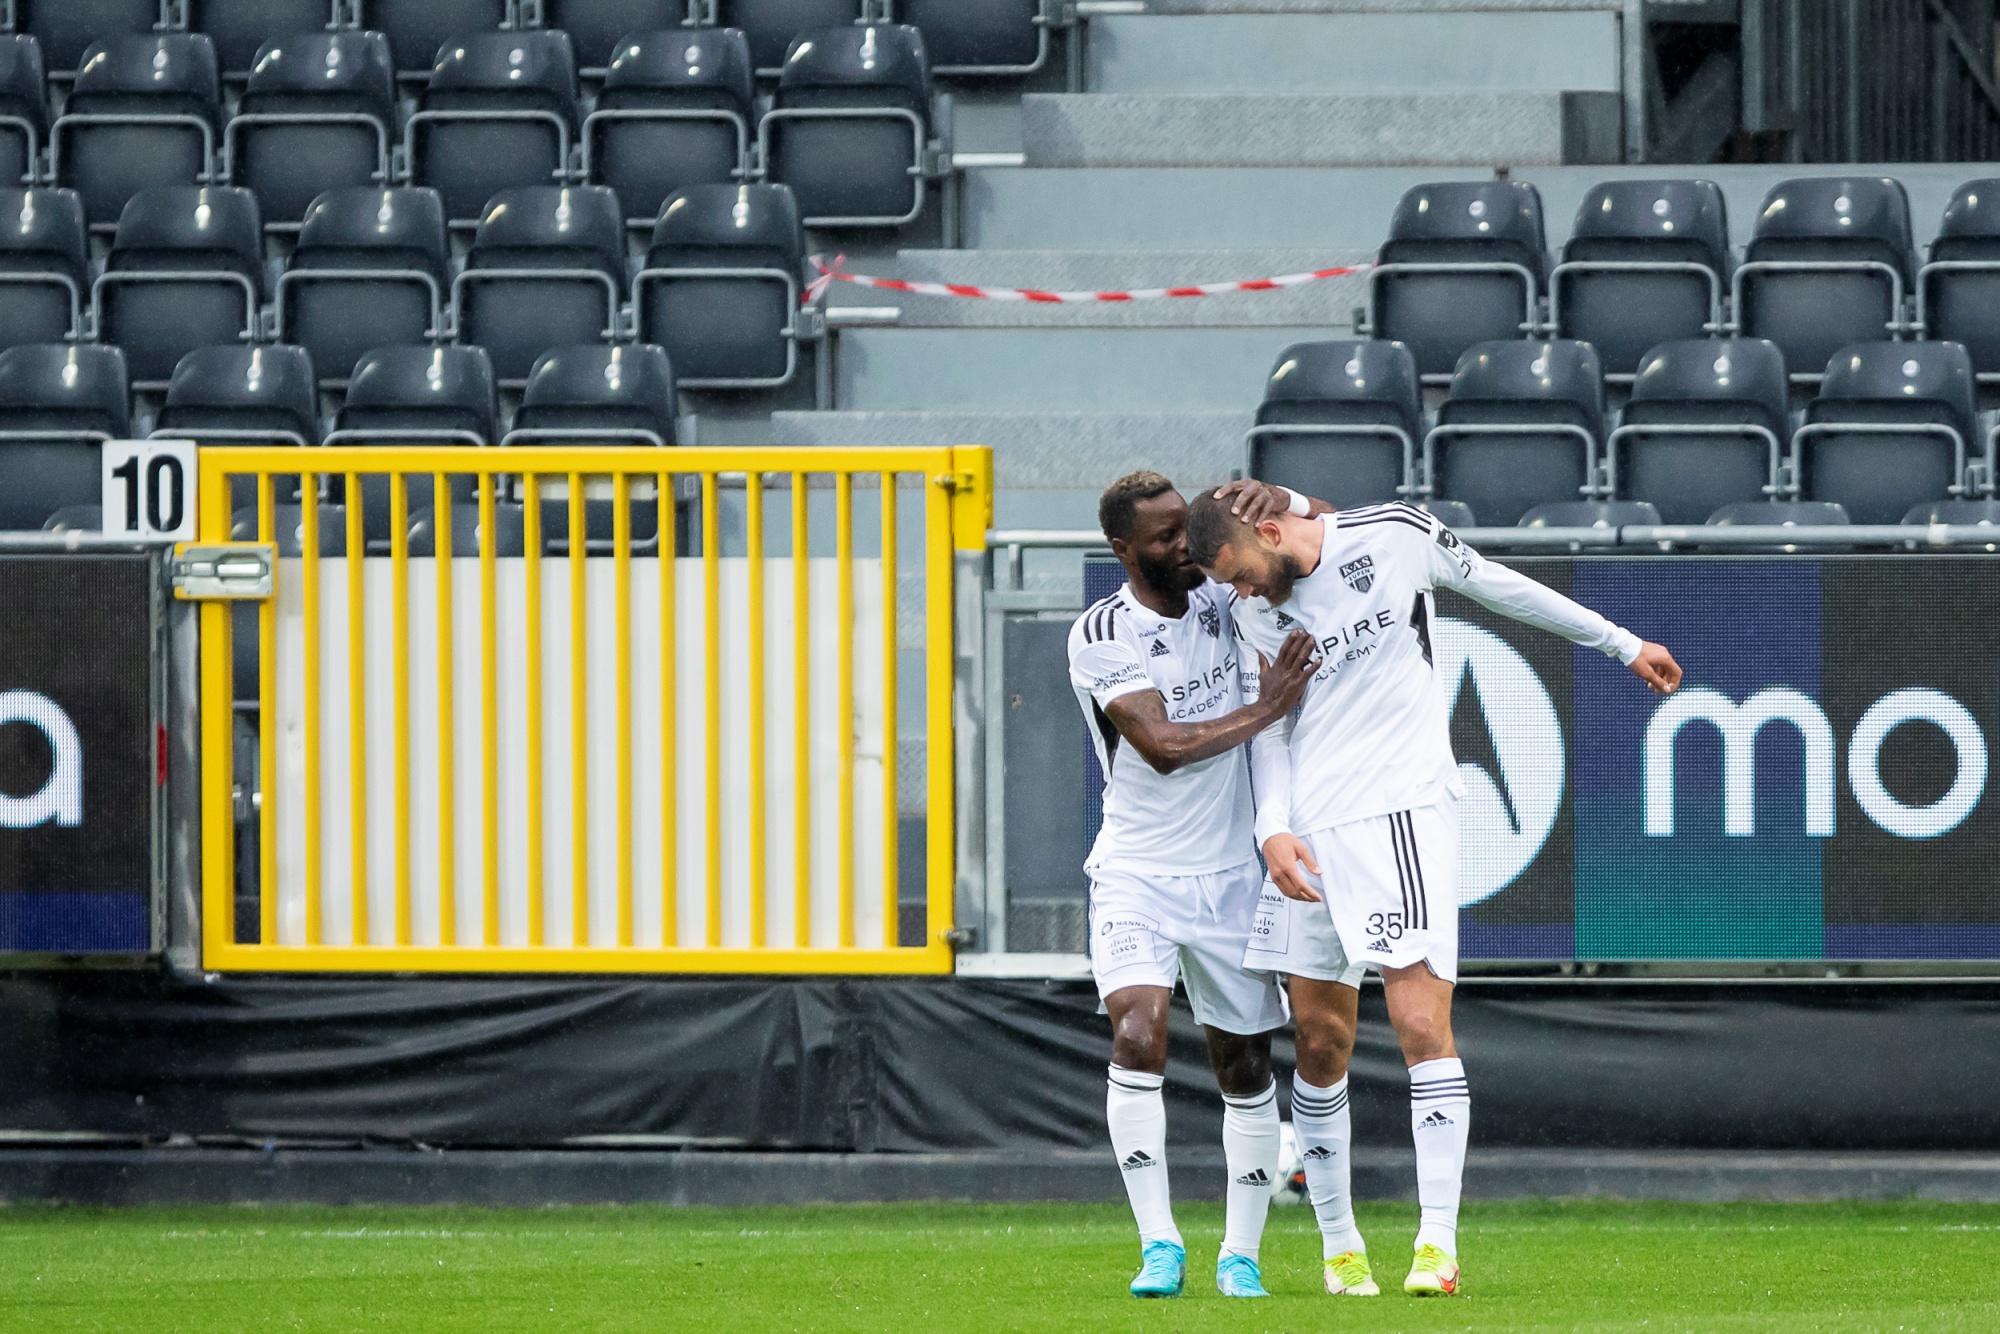 Eupen's Boris Lambert celebrates with a teammate after scoring during a soccer match between KAS Eupen and RUSG Royale Union Saint-Gilloise, Sunday 18 September 2022 in Eupen, on day 9 of the 2022-2023 'Jupiler Pro League' first division of the Belgian championship. BELGA PHOTO KRISTOF VAN ACCOM